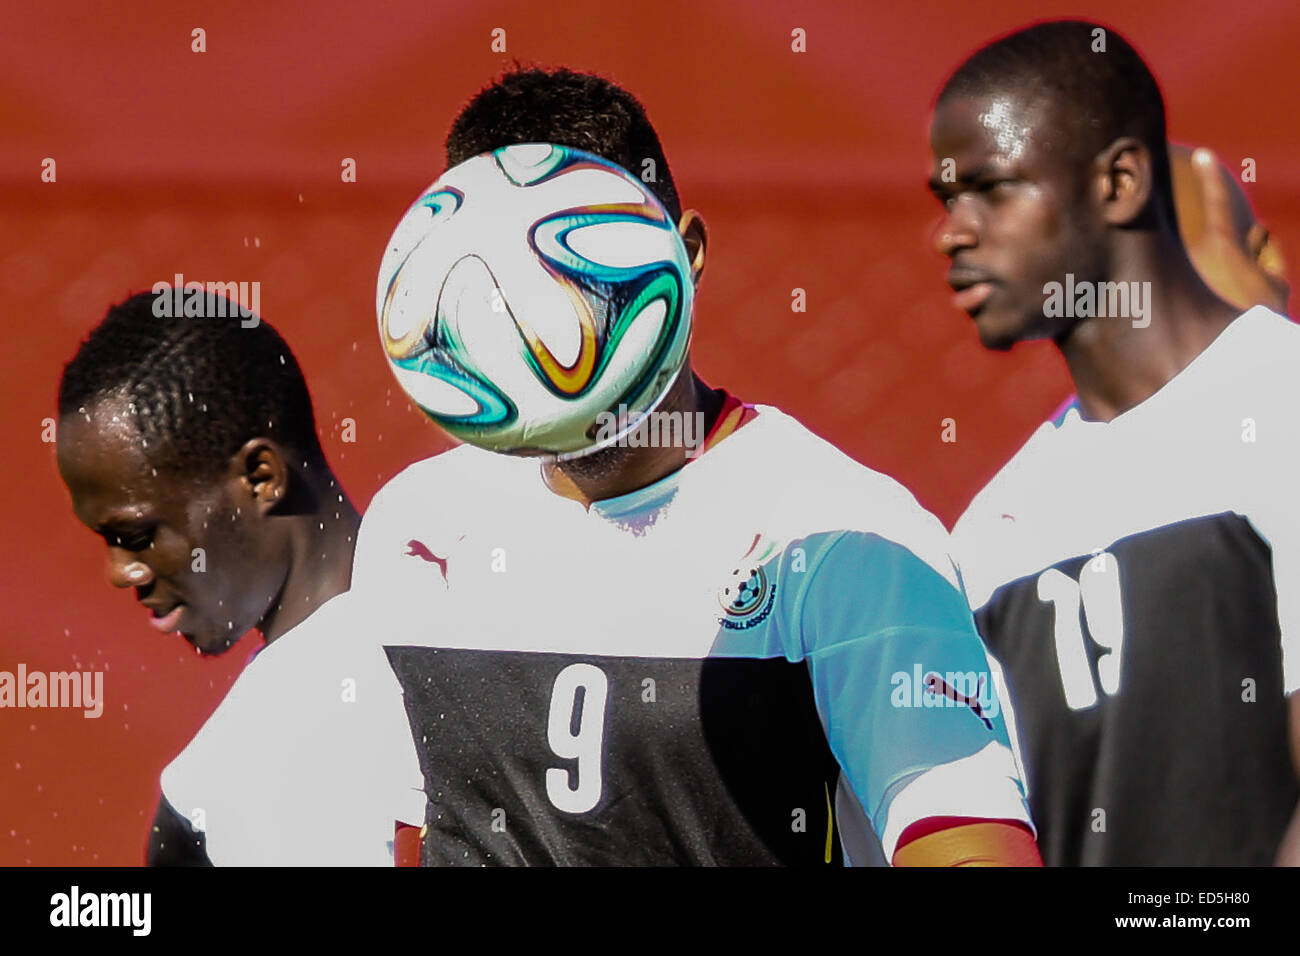 2014 FIFA World Cup - Ghana training at the National Stadium of Brazil Mane Garrincha Salvador ahead of their game against Portugal  Featuring: Kevin Prince Boateng Where: Brasilia, DF, Brazil When: 25 Jun 2014 Stock Photo